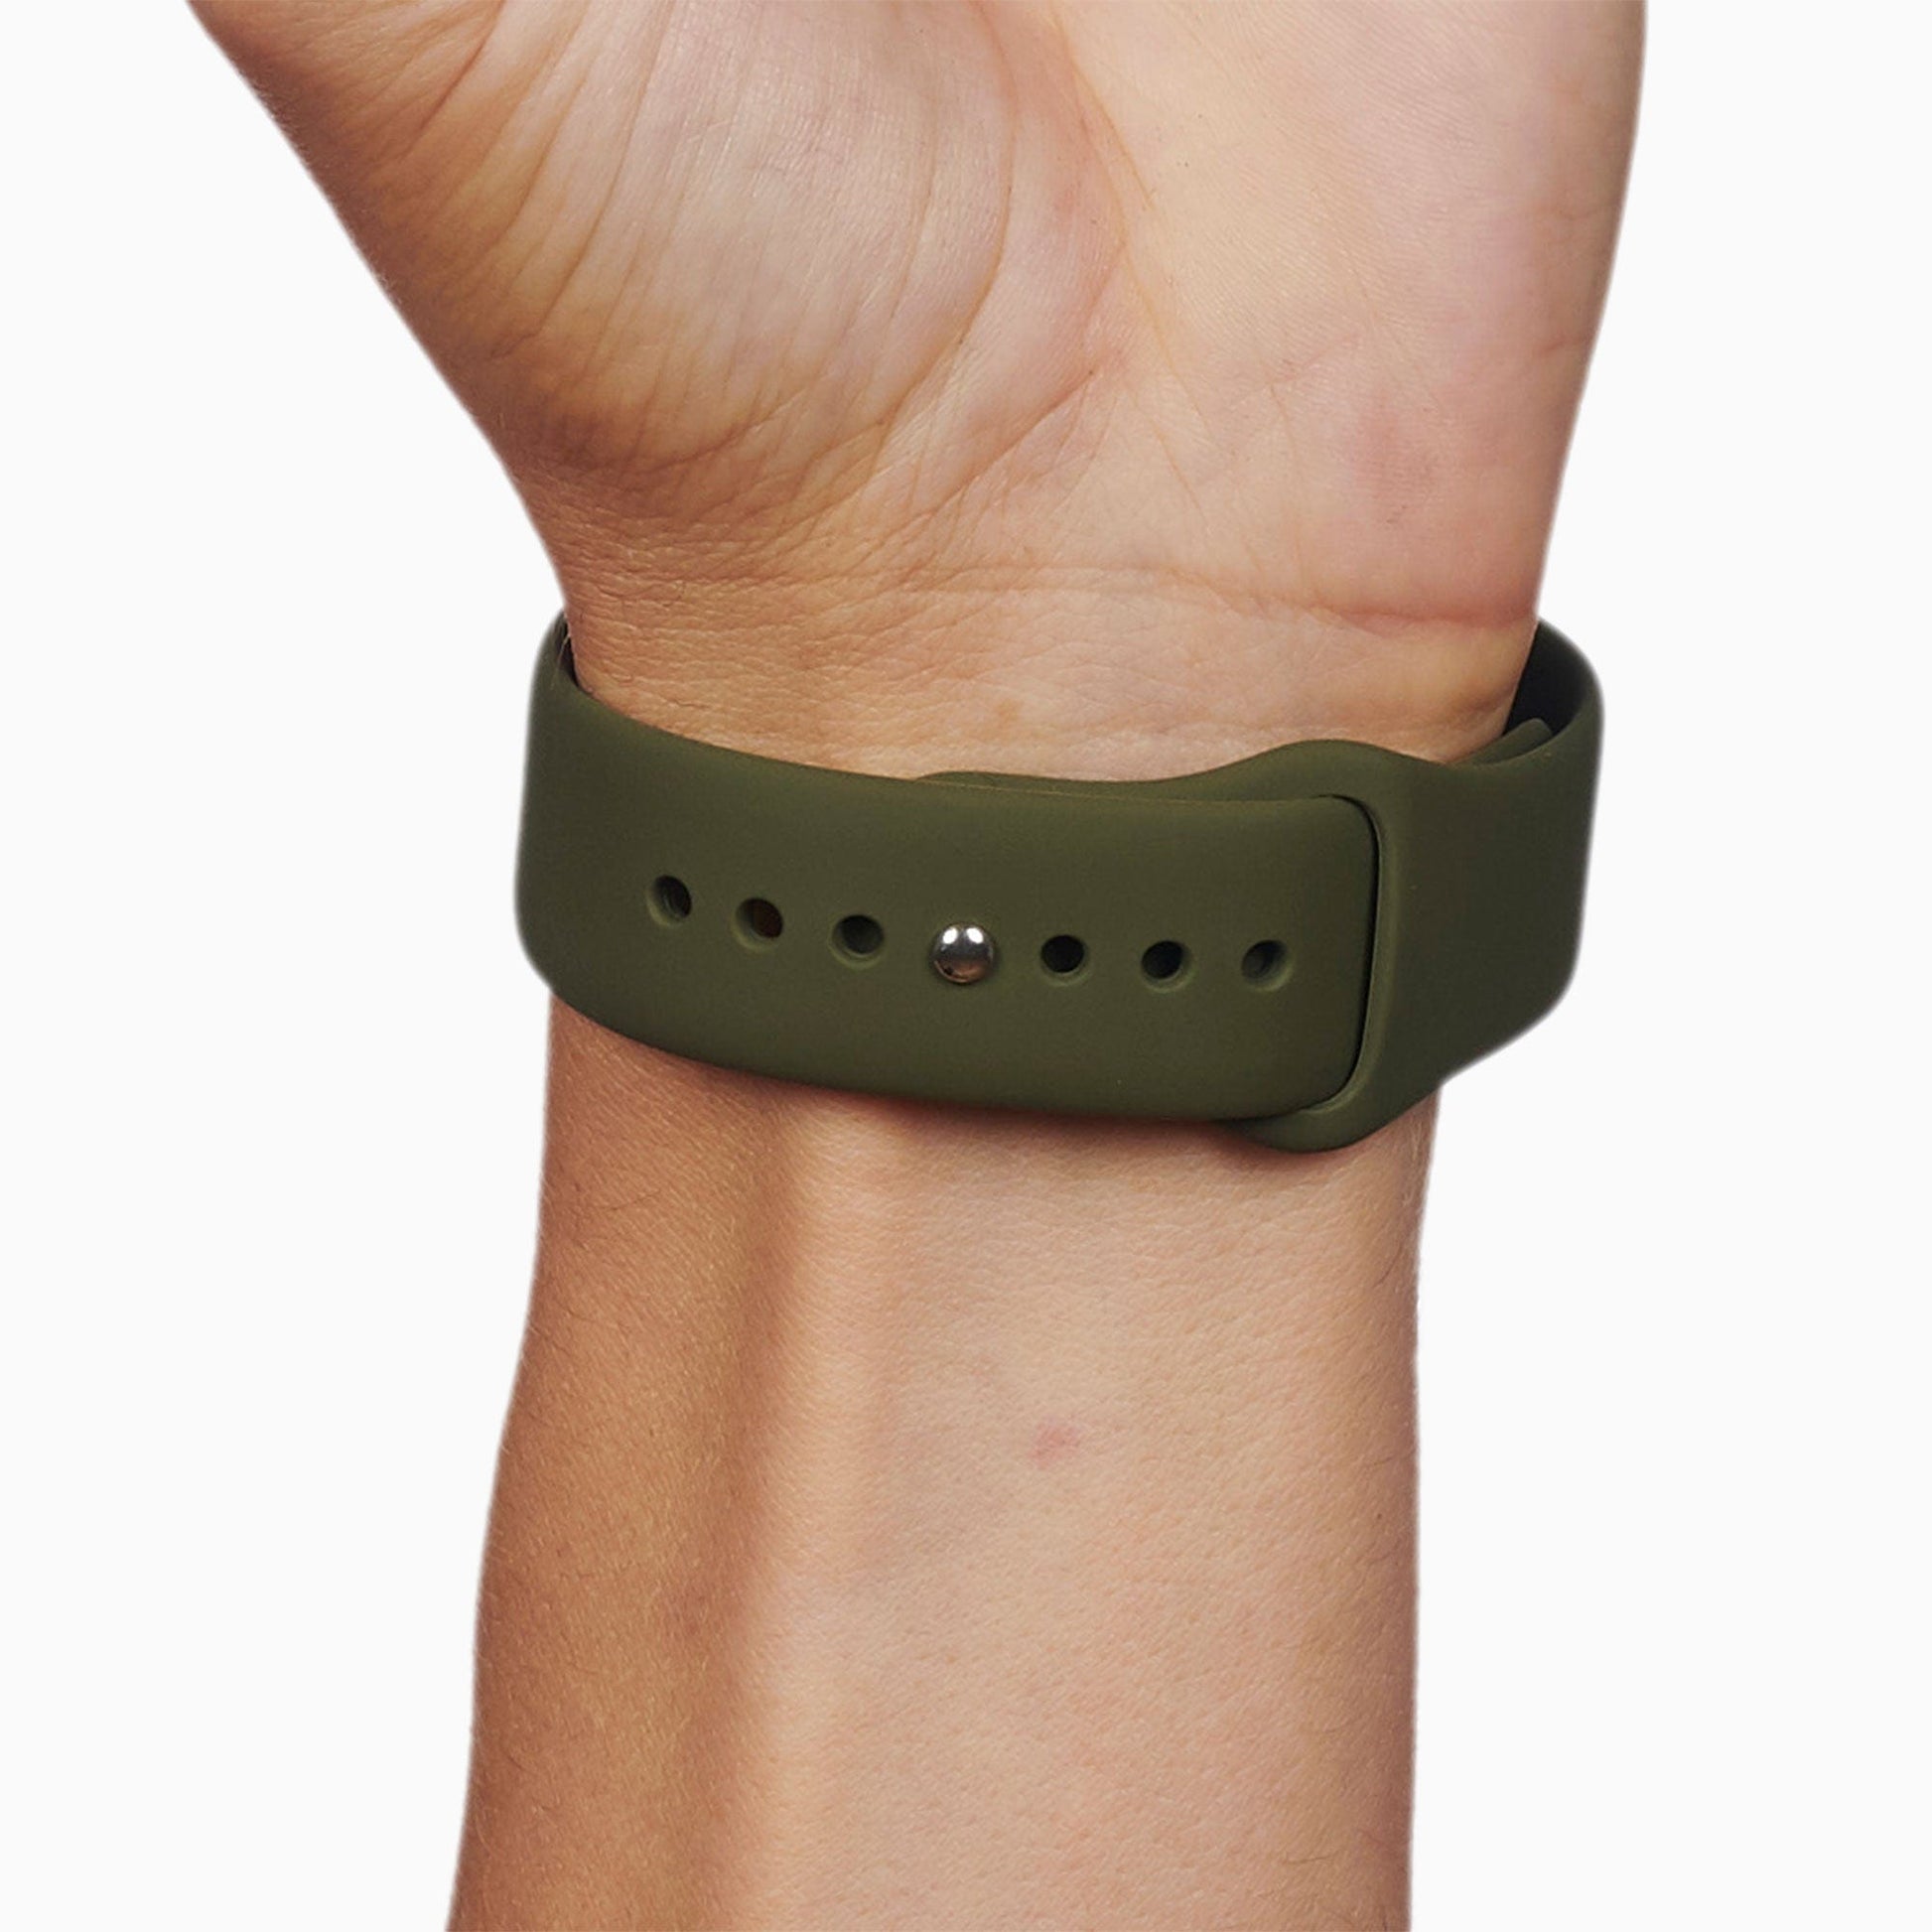 Dark Olive Sport Band for Apple Watch